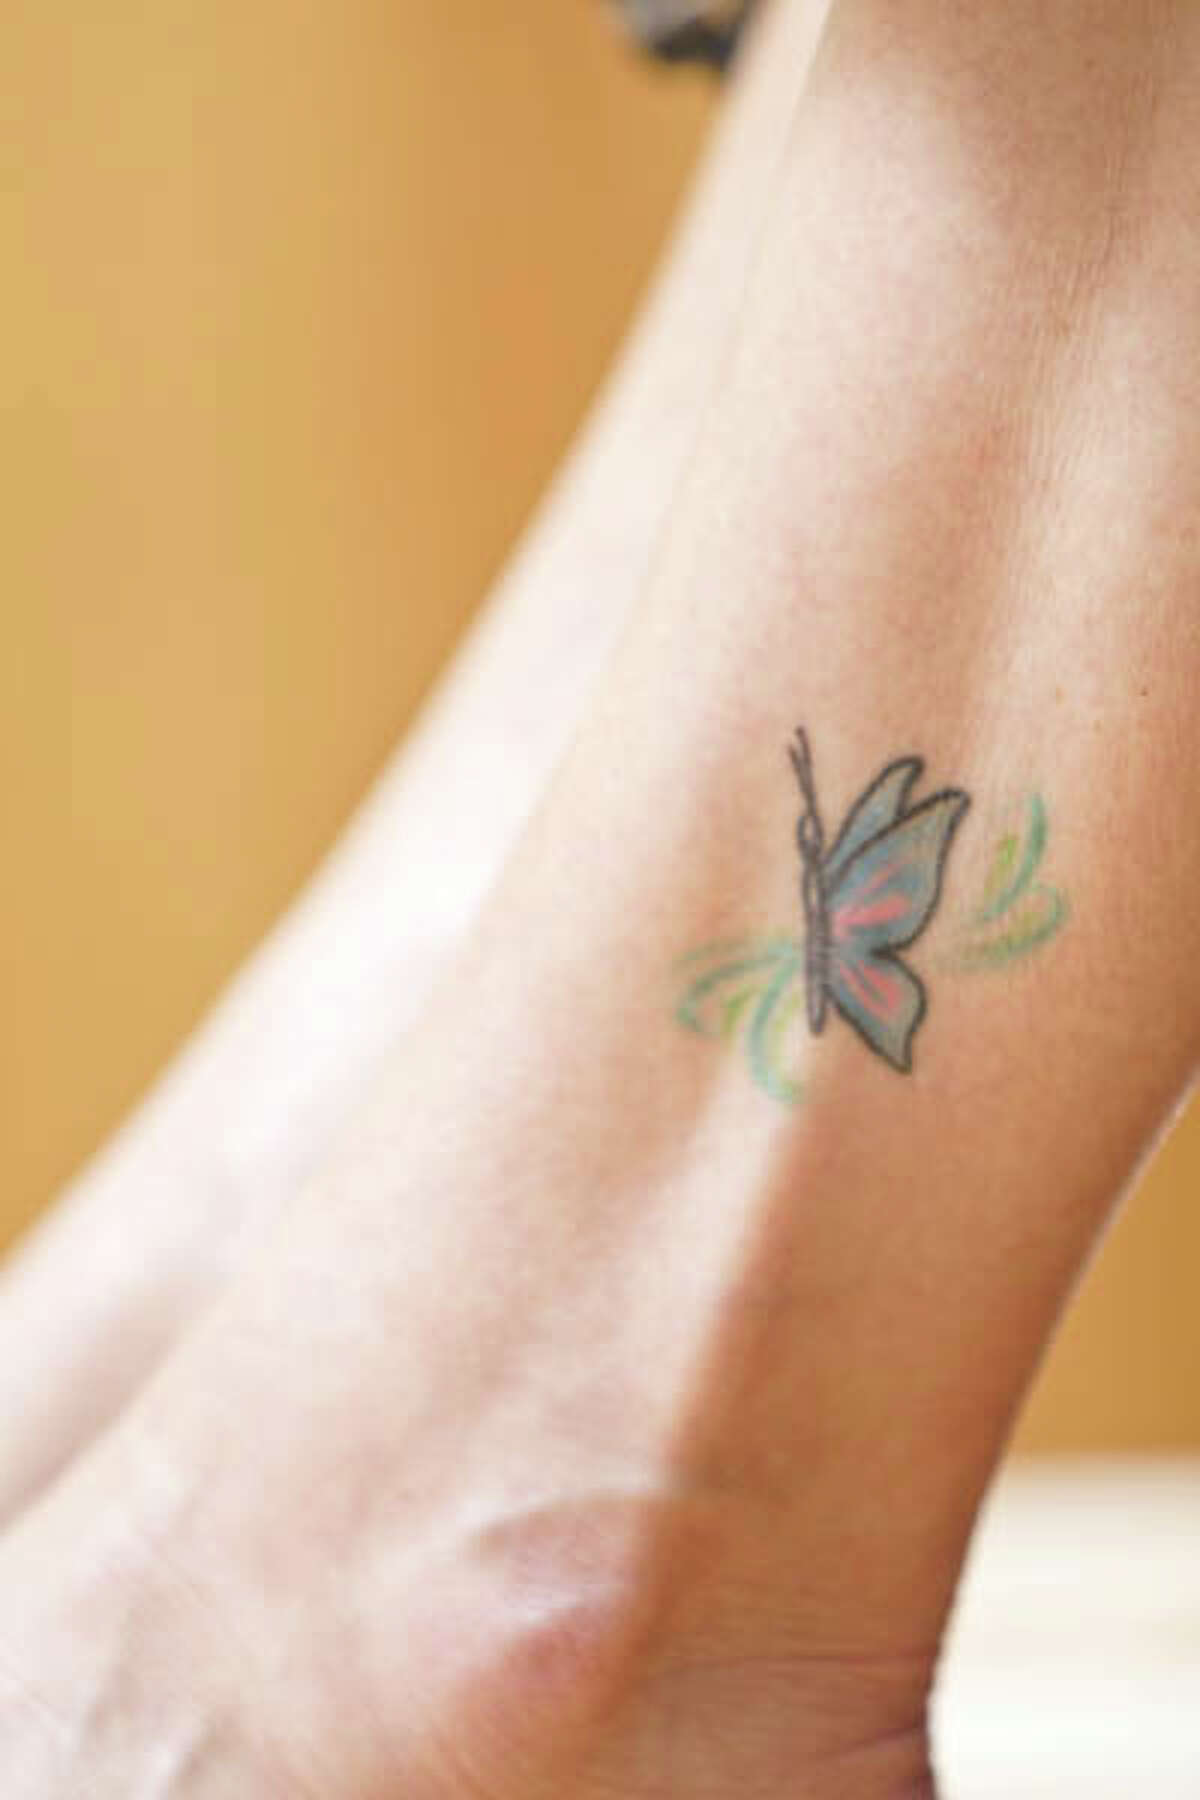 HealthyLife cover model Pam Lejeunesse, 53, of Clifton Park, got a butterfly tattoo on her ankle as a way to bond with her daughters, Heather and Ashley, during a vacation in Virginia a few years ago. "It was spur-of-the-moment to an extent, although we planned it once we were down there, choosing the place to go and the designs we wanted," she says. "We had been talking about getting tattoos for a long time." (Photo by Suzanne Kawola/HealthyLife)